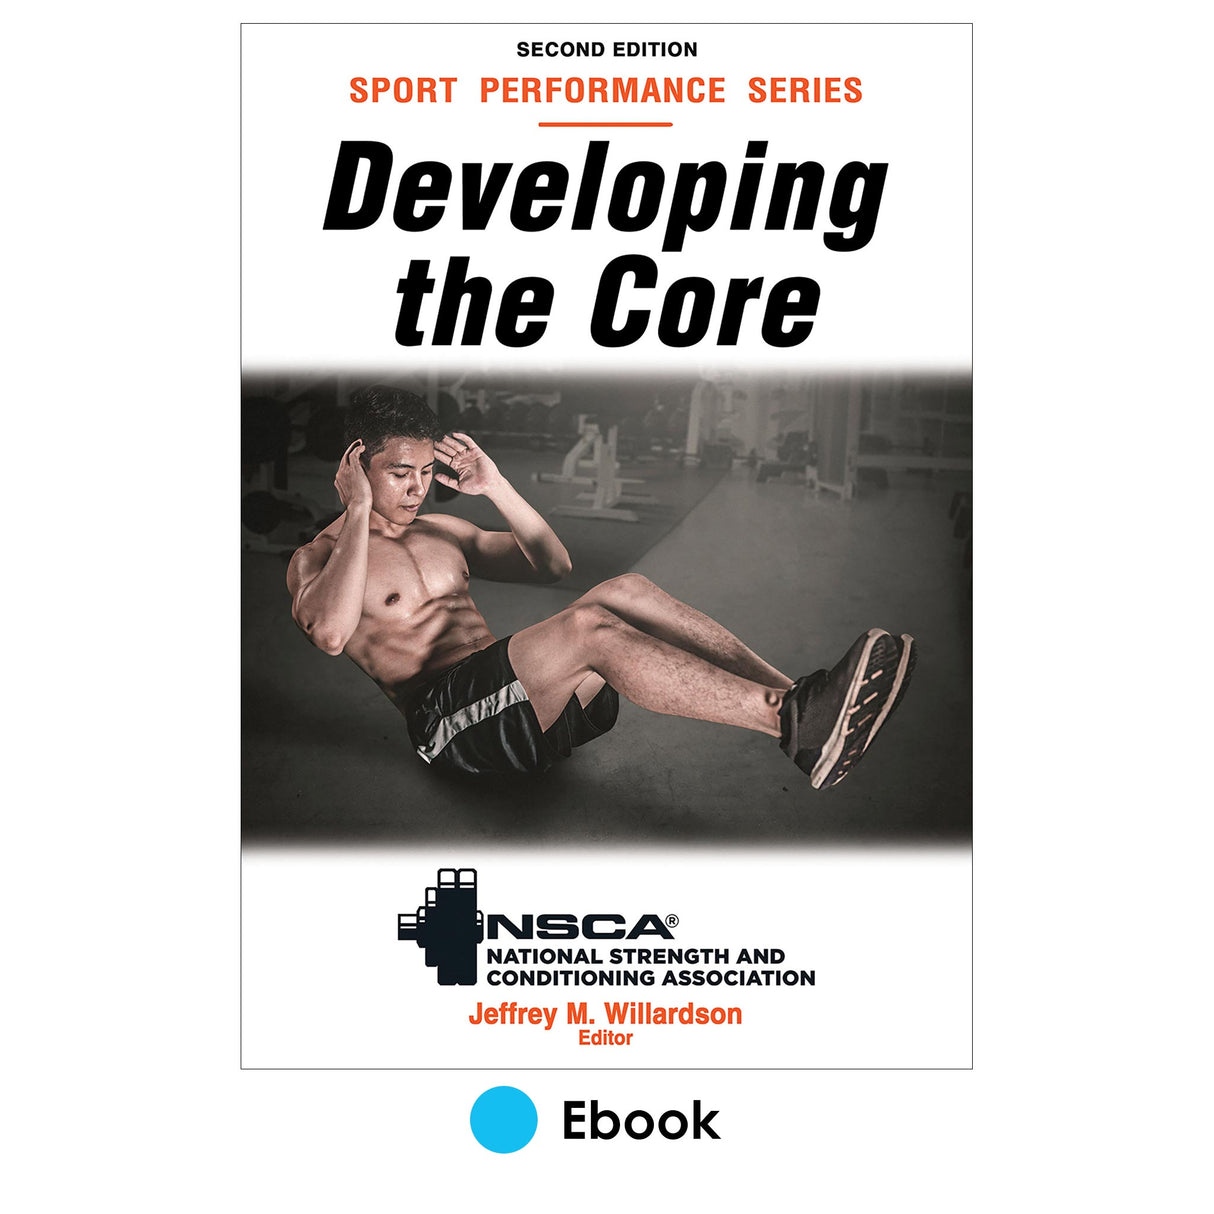 Developing the Core 2nd Edition epub